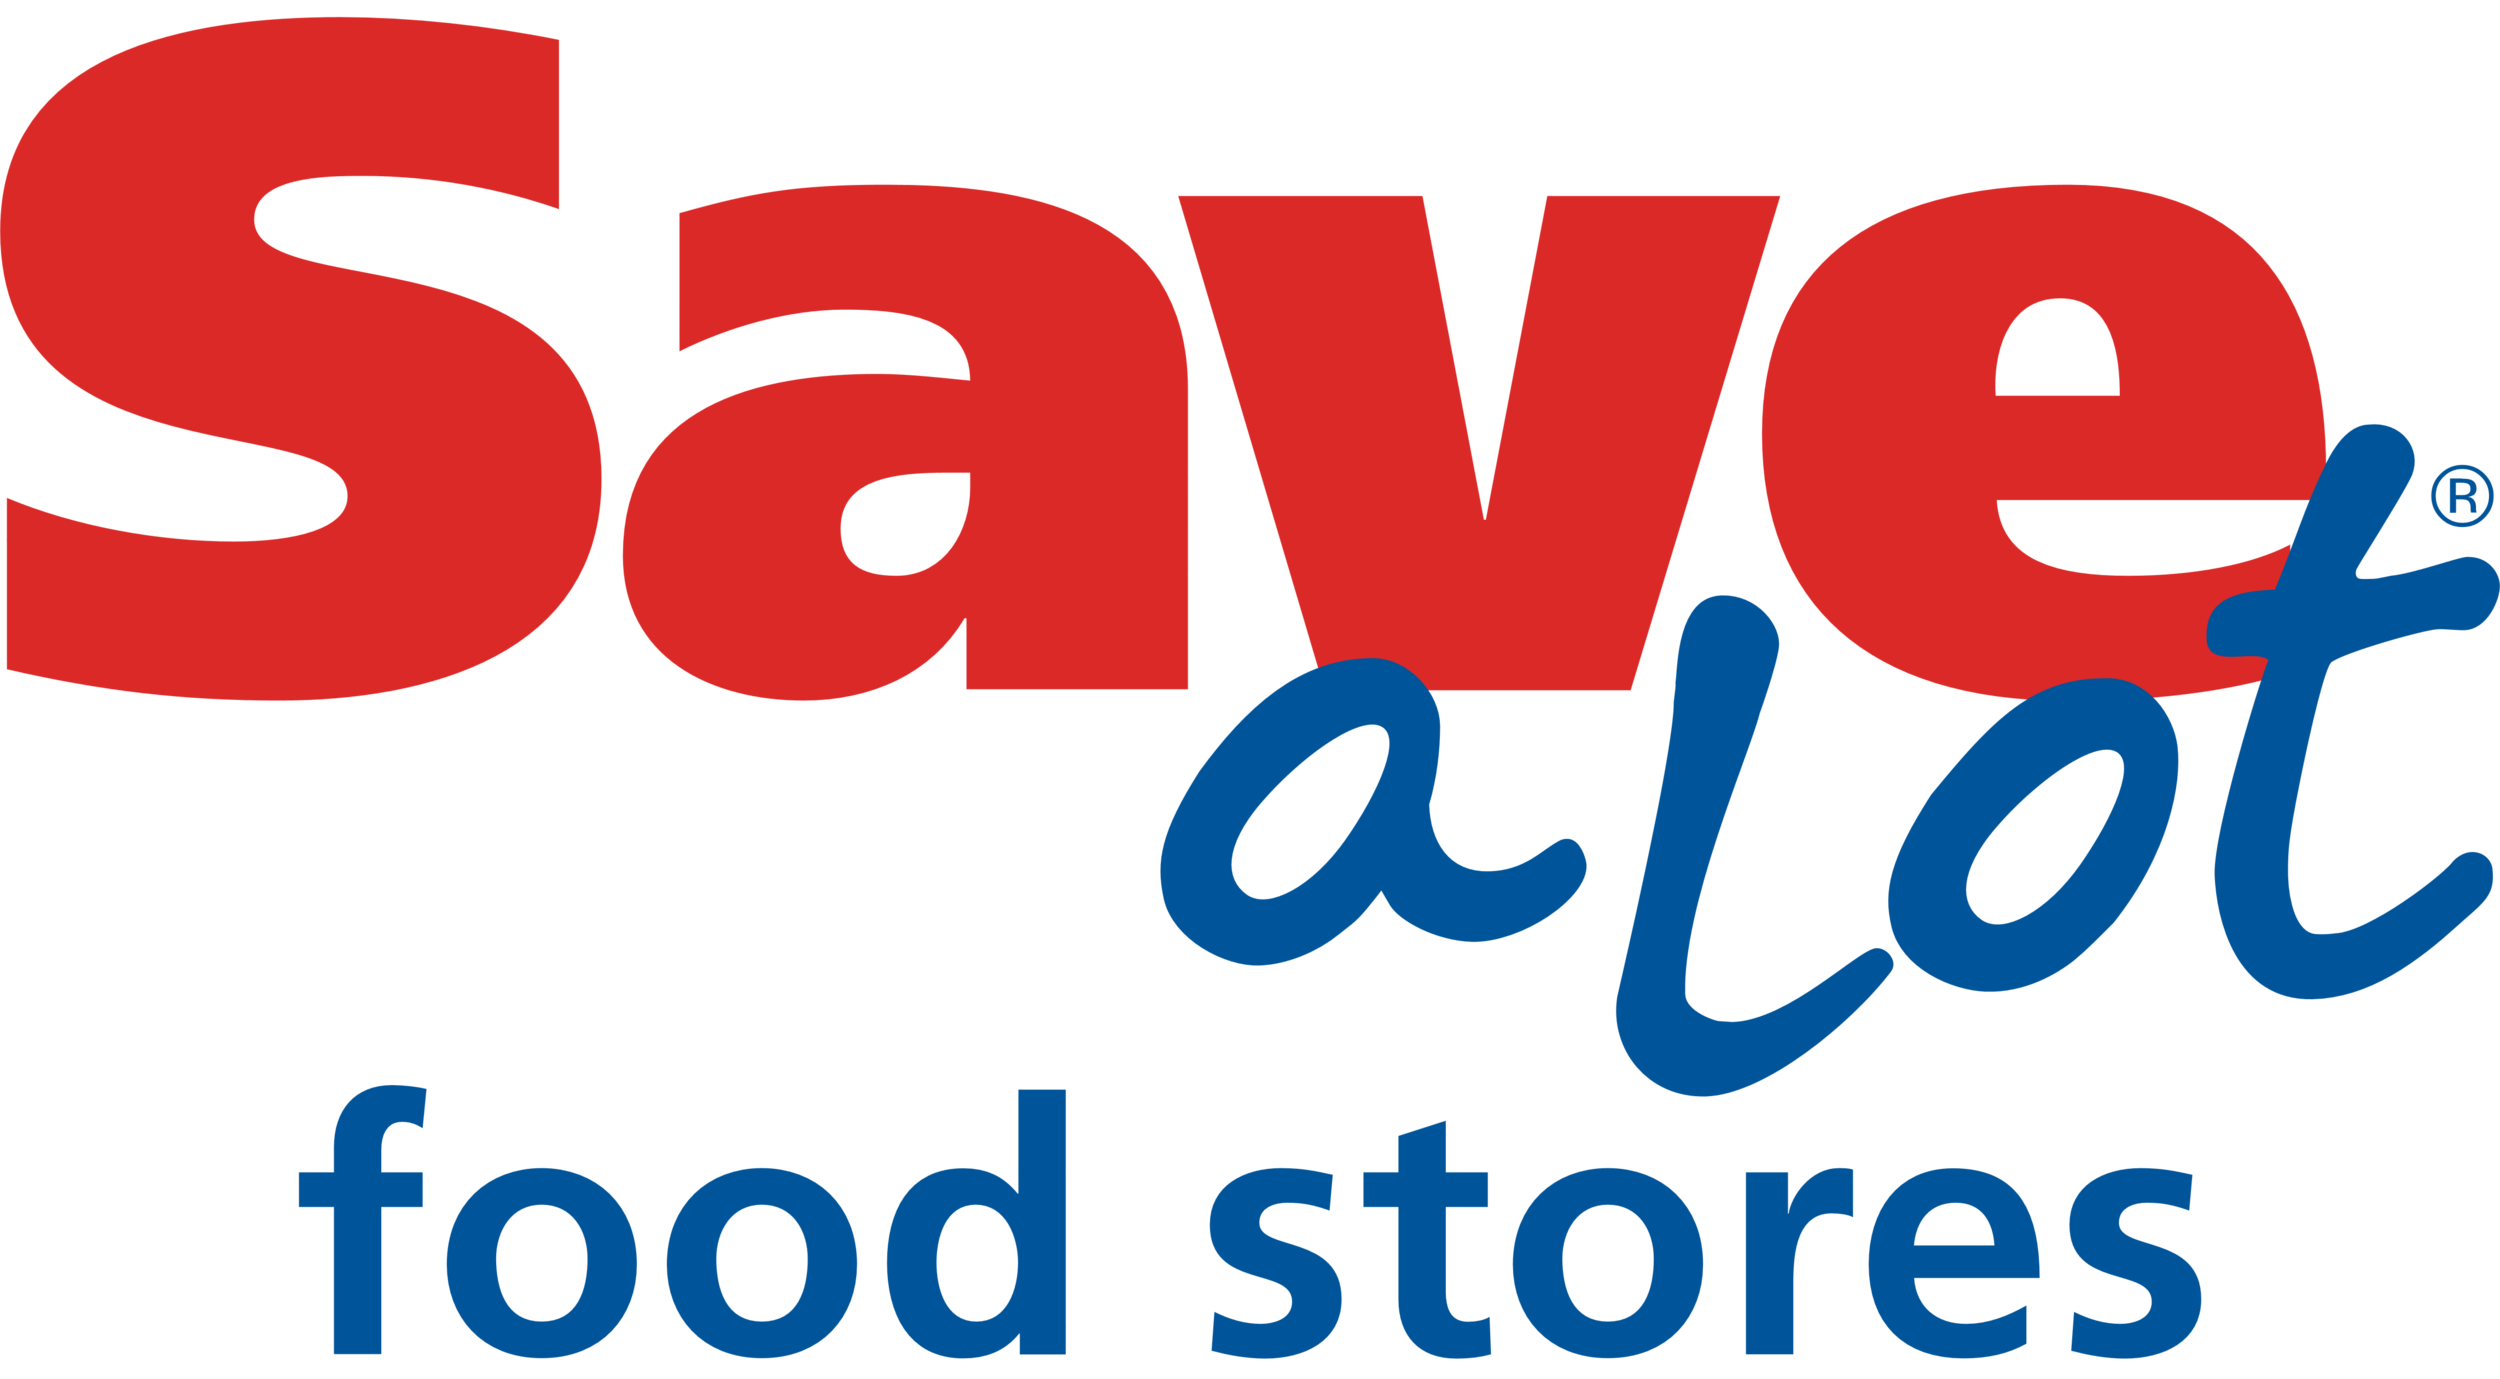 Save-A-Lot Logo.png.png